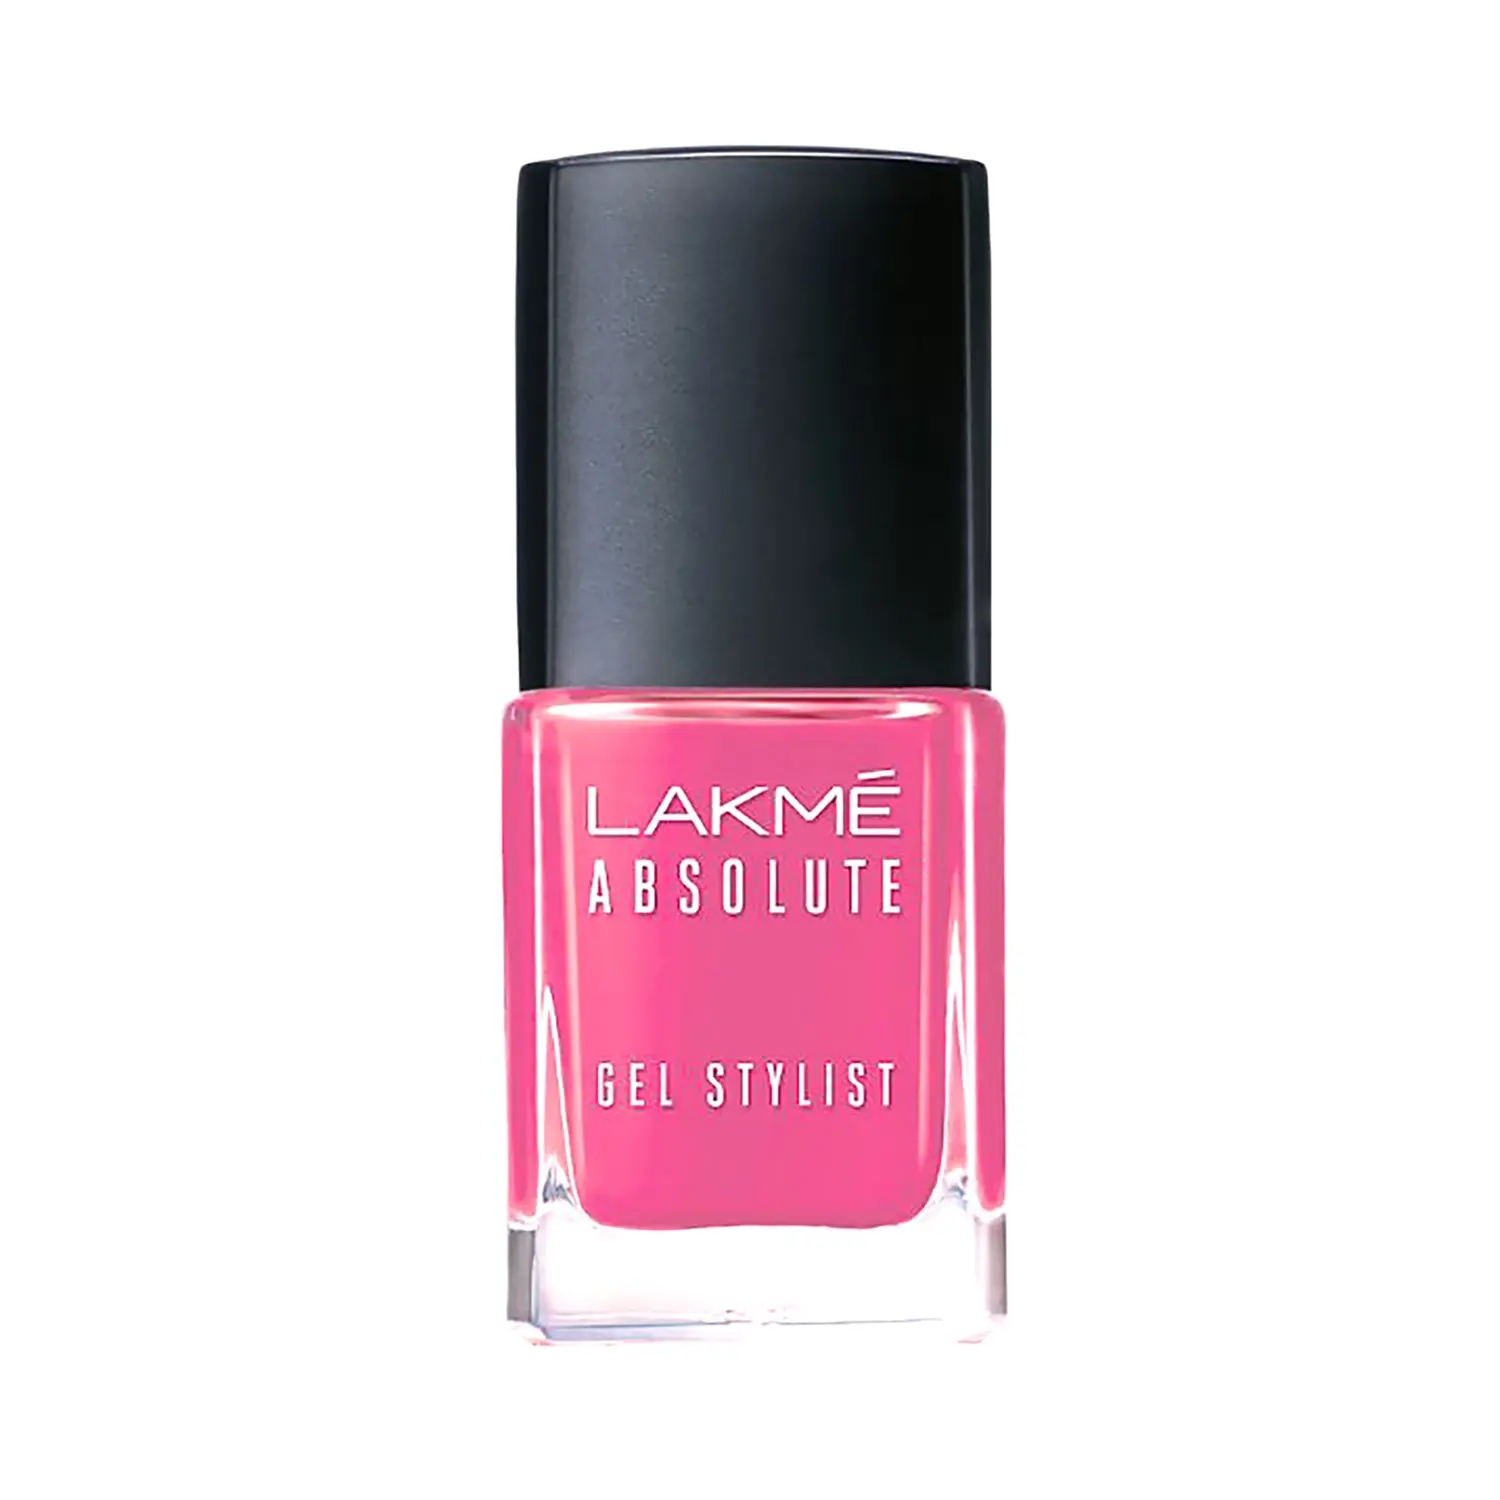 Lakme | Lakme Absolute Gel Stylist Nail Color - Pink Date (12ml)